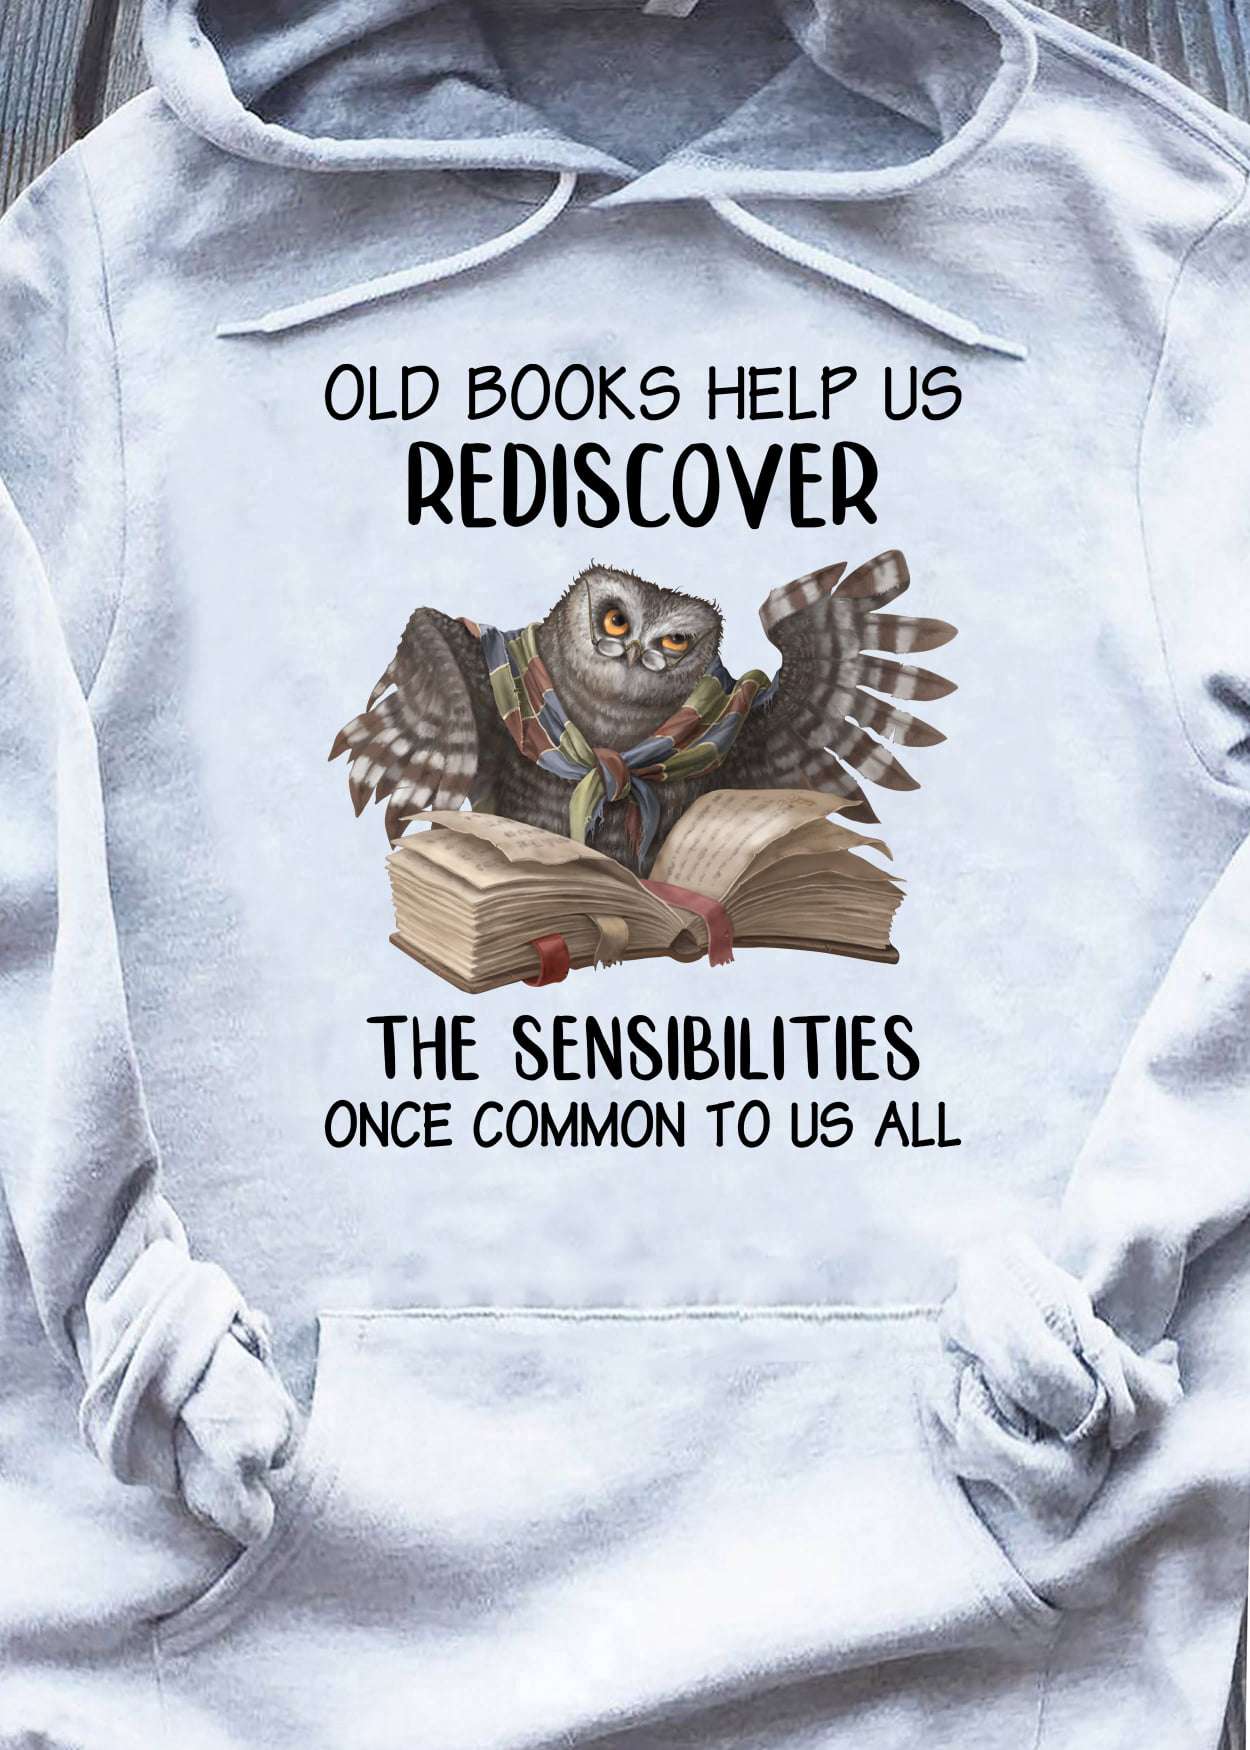 Old books help us rediscover, the sensibilities once common to us all - Owl bookaholic